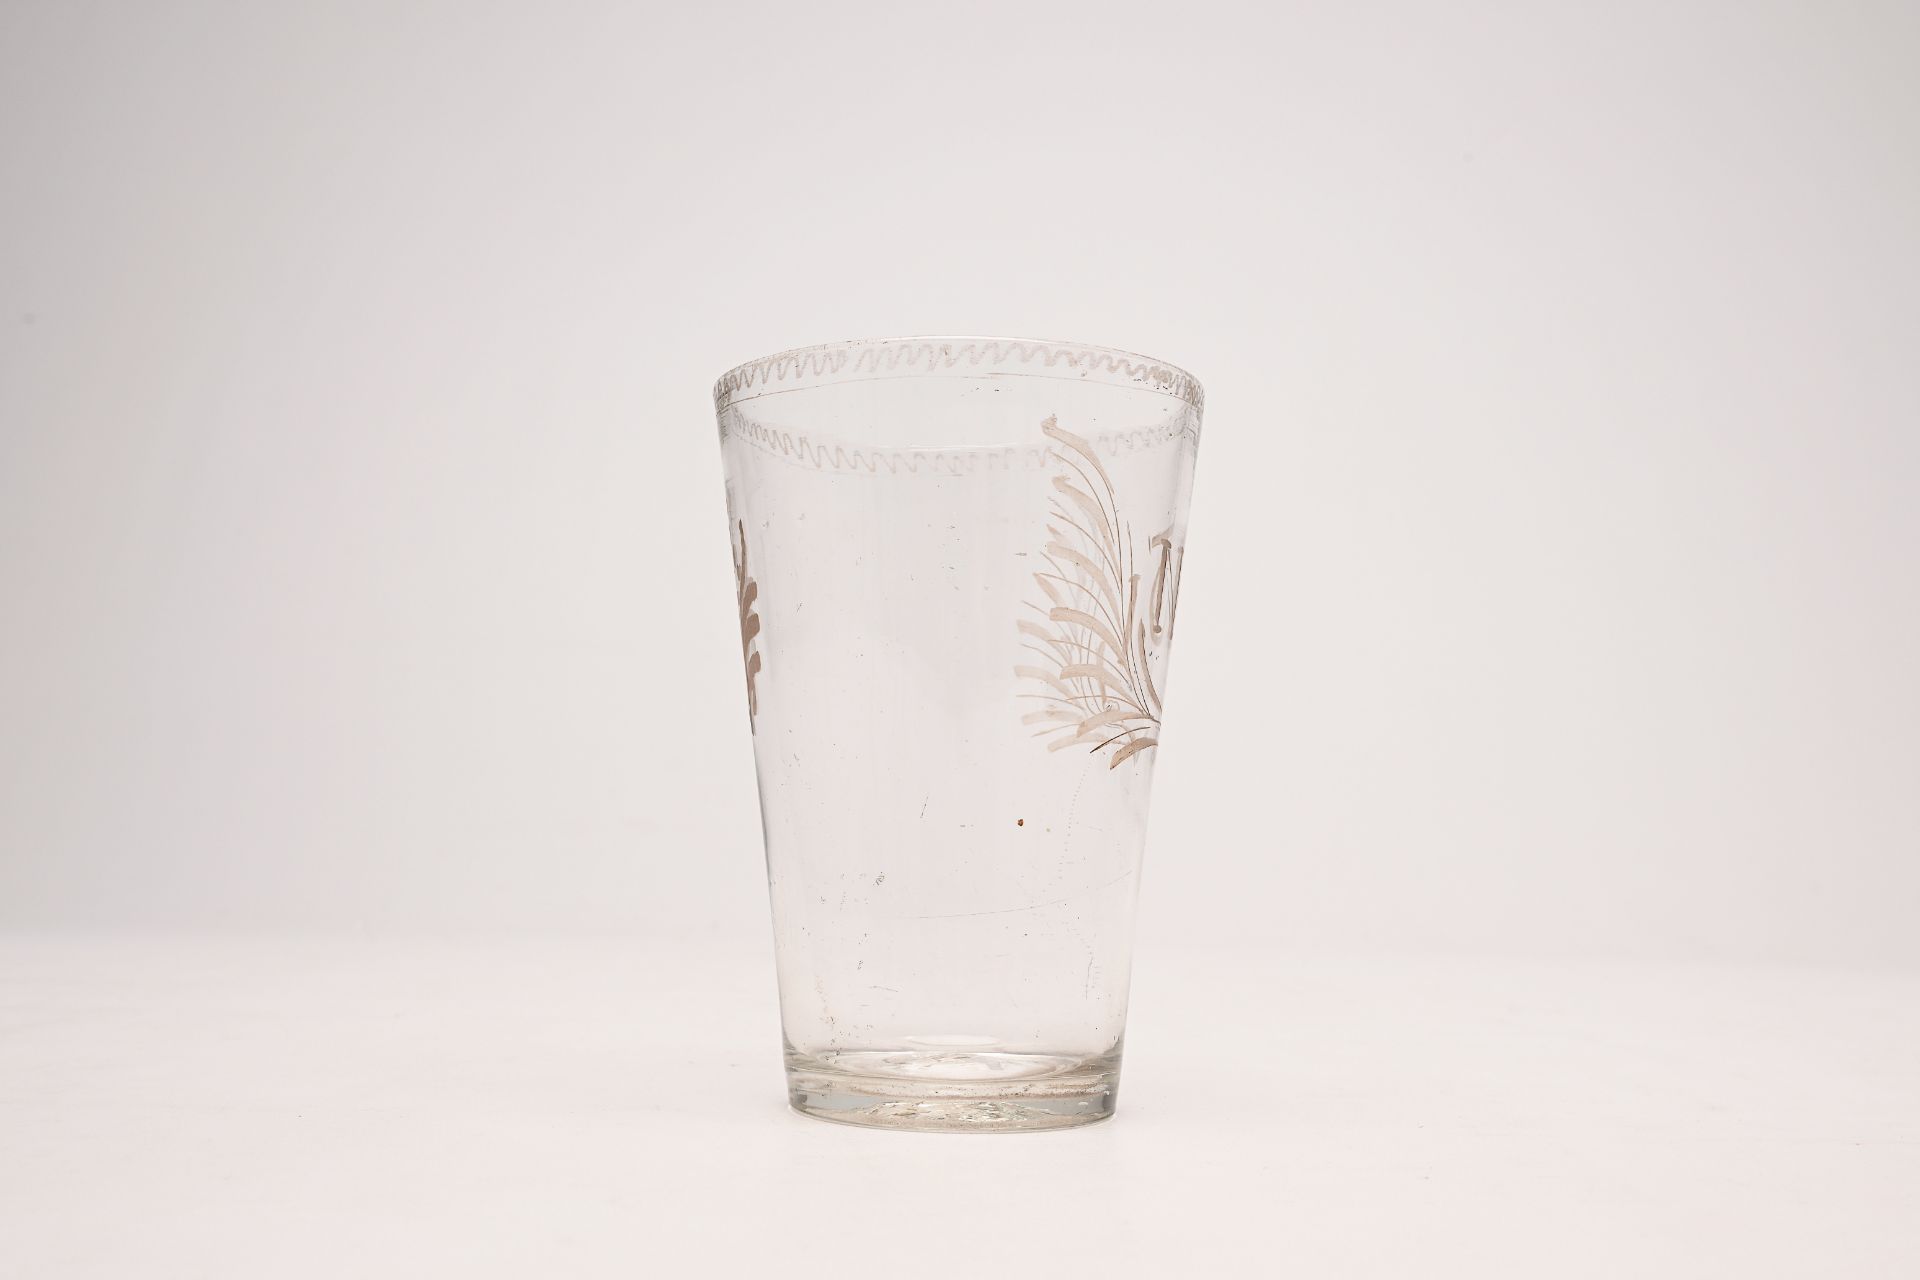 An etched or engraved glass with monogram NOI, end 18th C. - Image 4 of 6